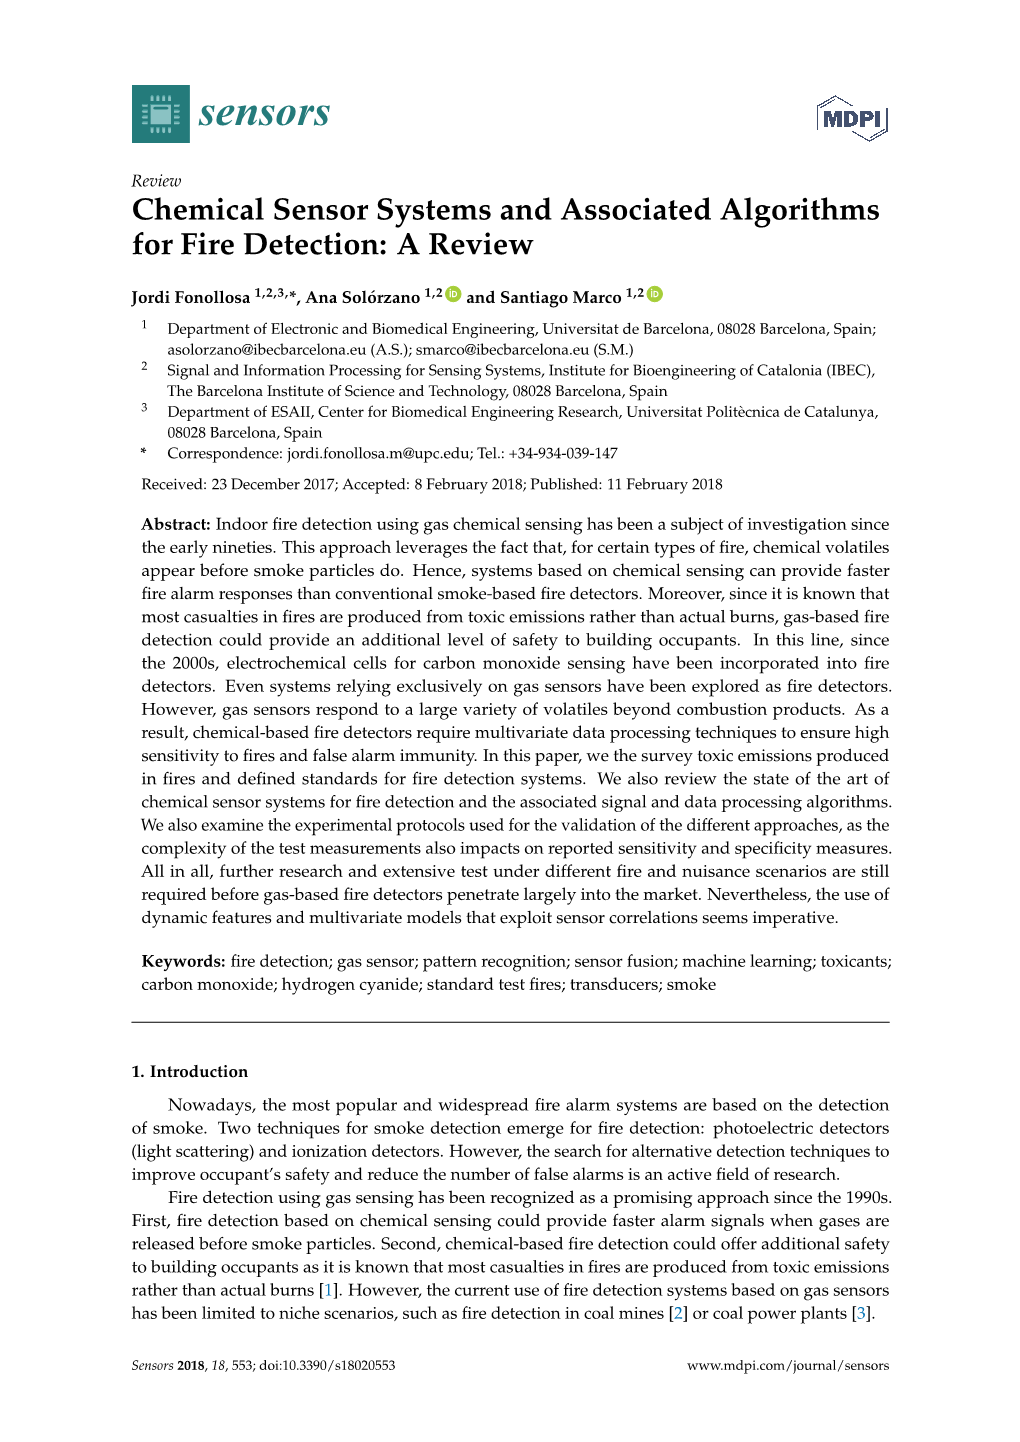 Chemical Sensor Systems and Associated Algorithms for Fire Detection: a Review